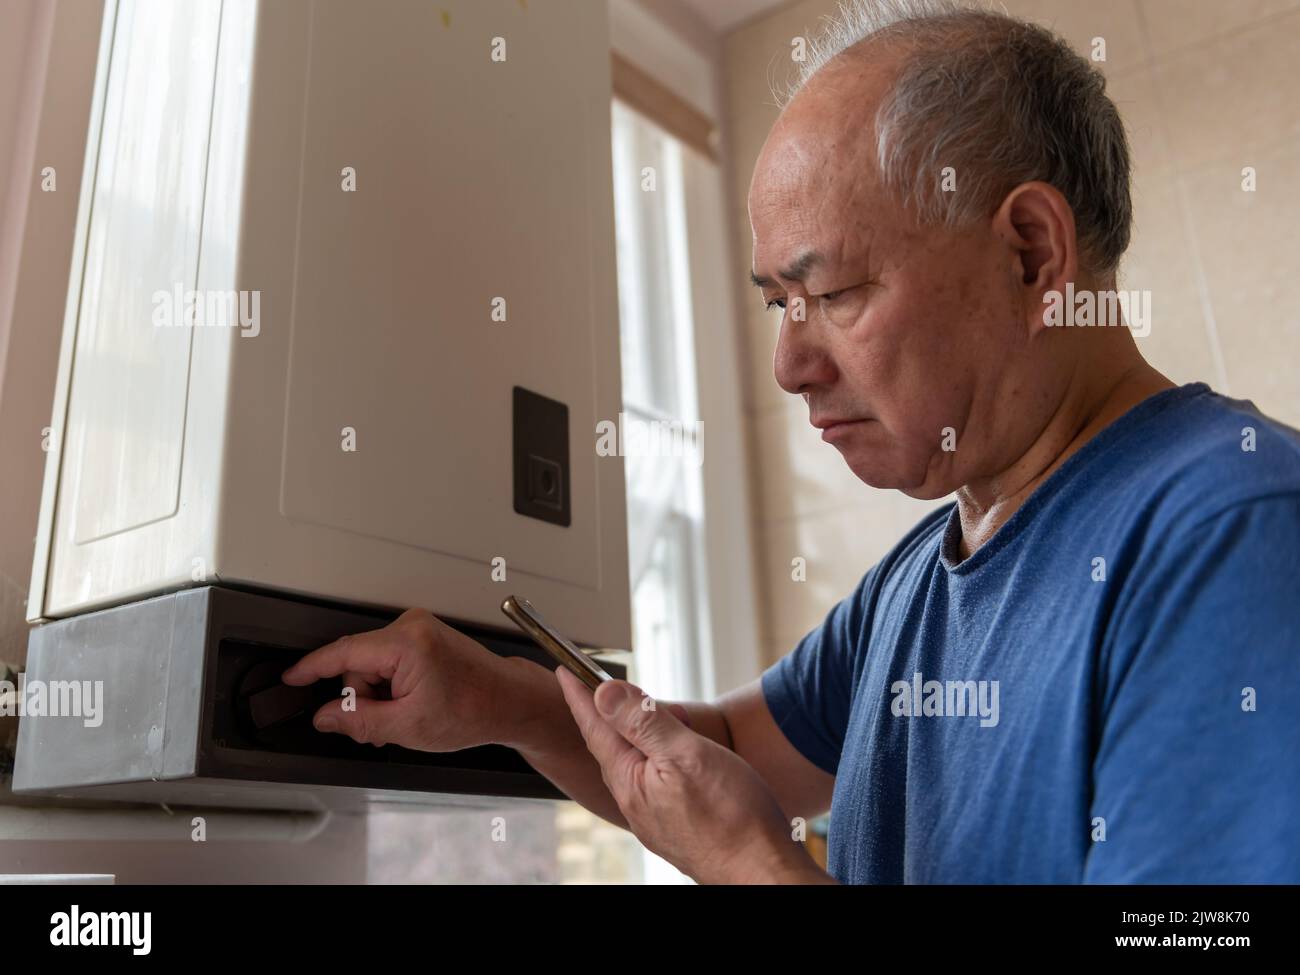 A senior man turning down the hot water boiler to save money trying to cope with dramatic increase in energy cost. Stock Photo